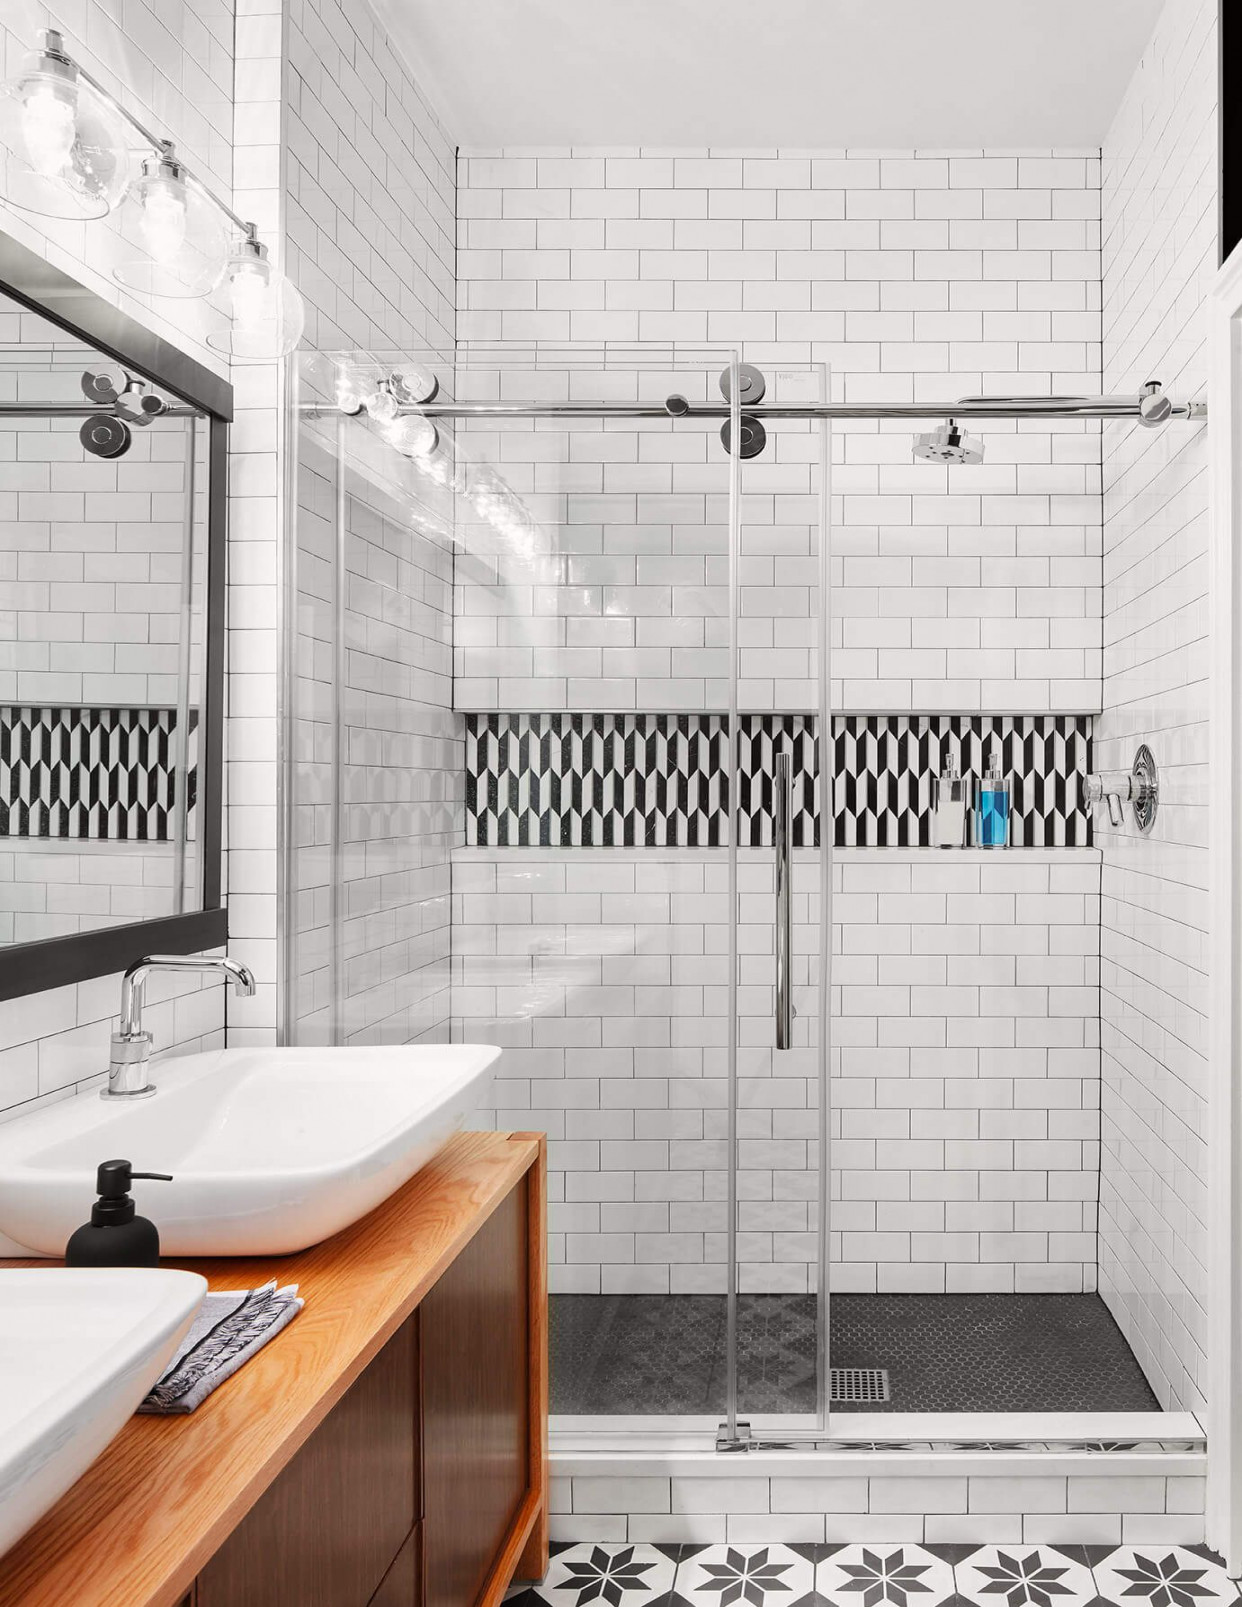 Subway Tile Bathroom Ideas to Inspire Your Next Remodel